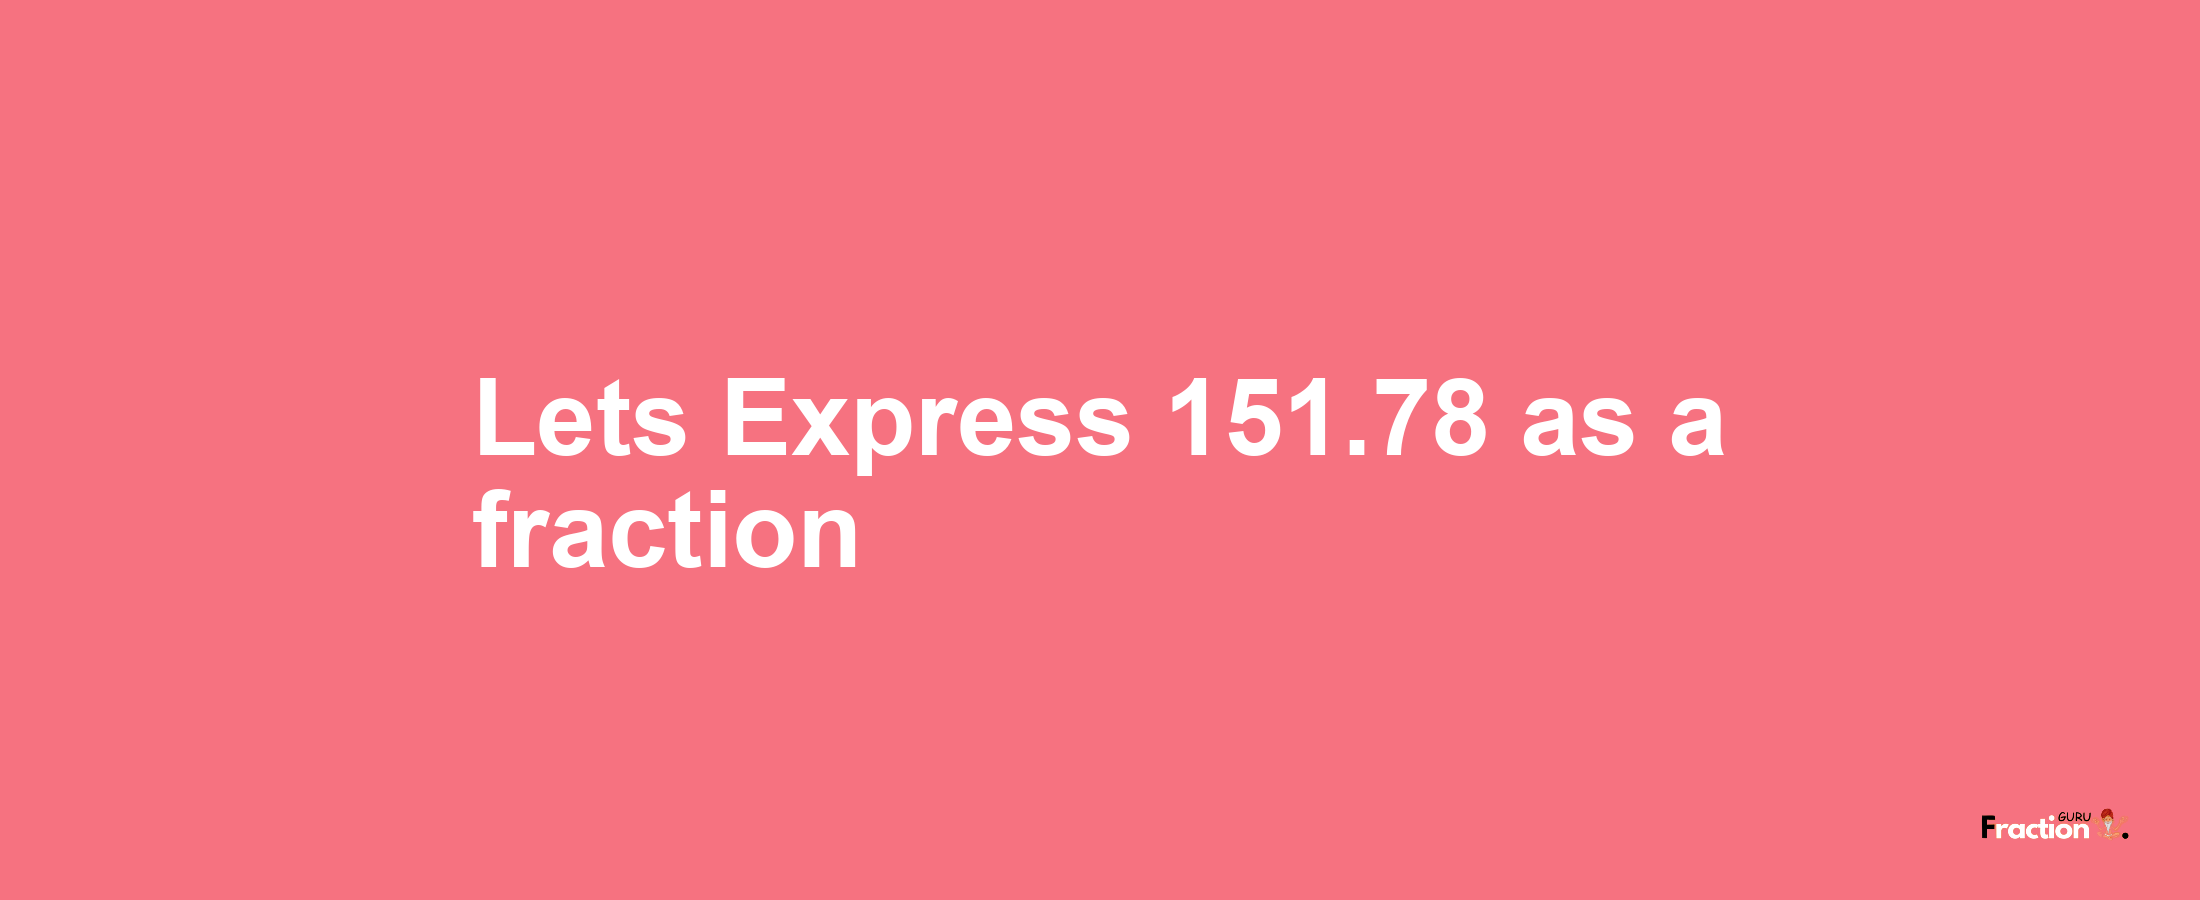 Lets Express 151.78 as afraction